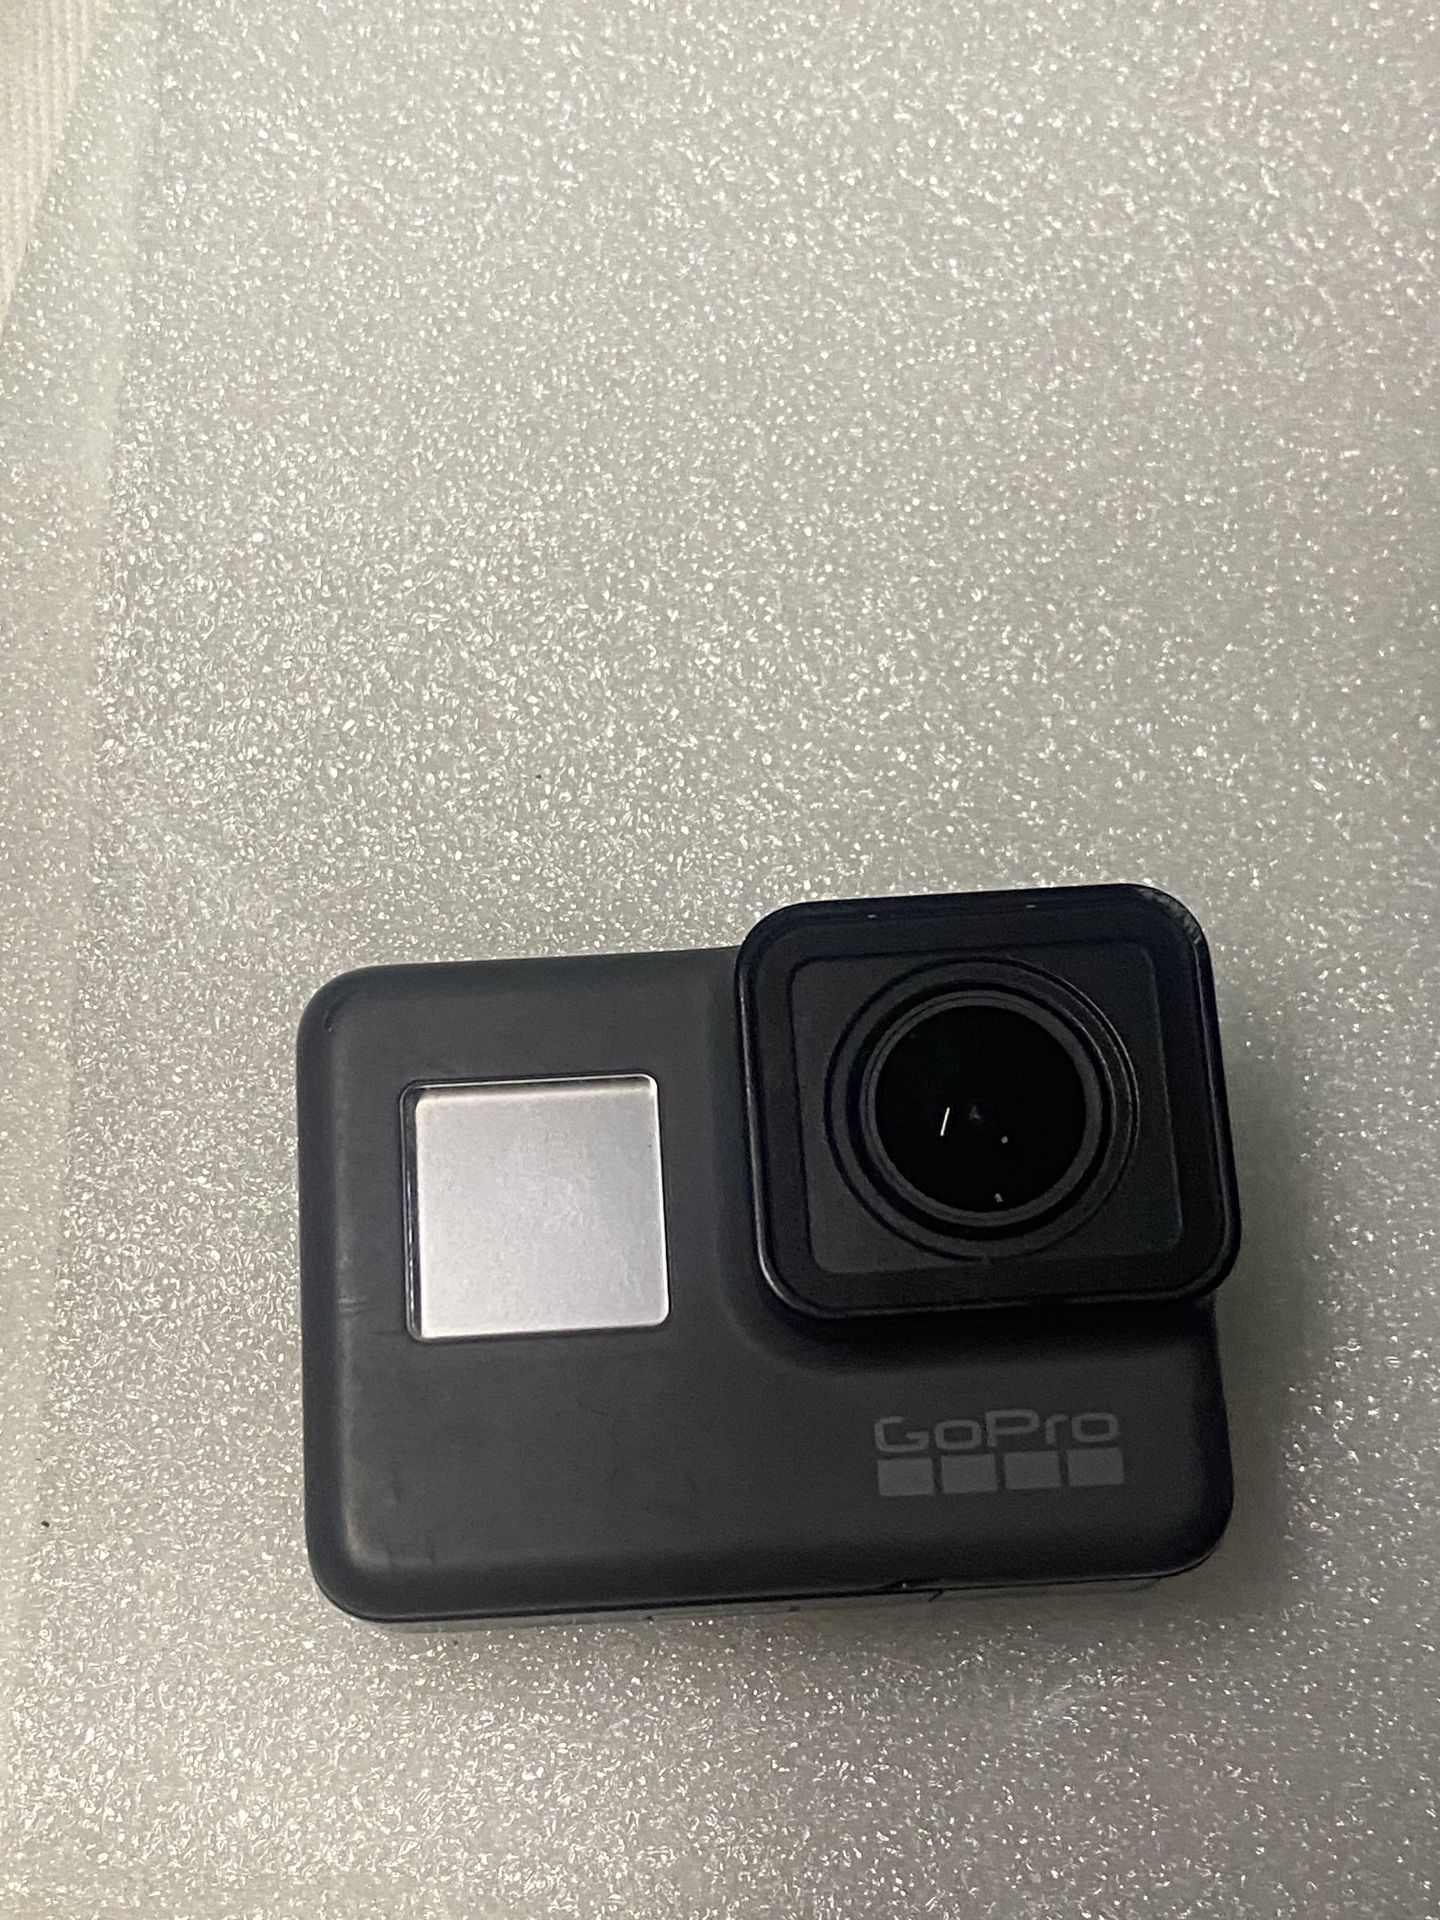 GoPro Hero 5 With Accessories 